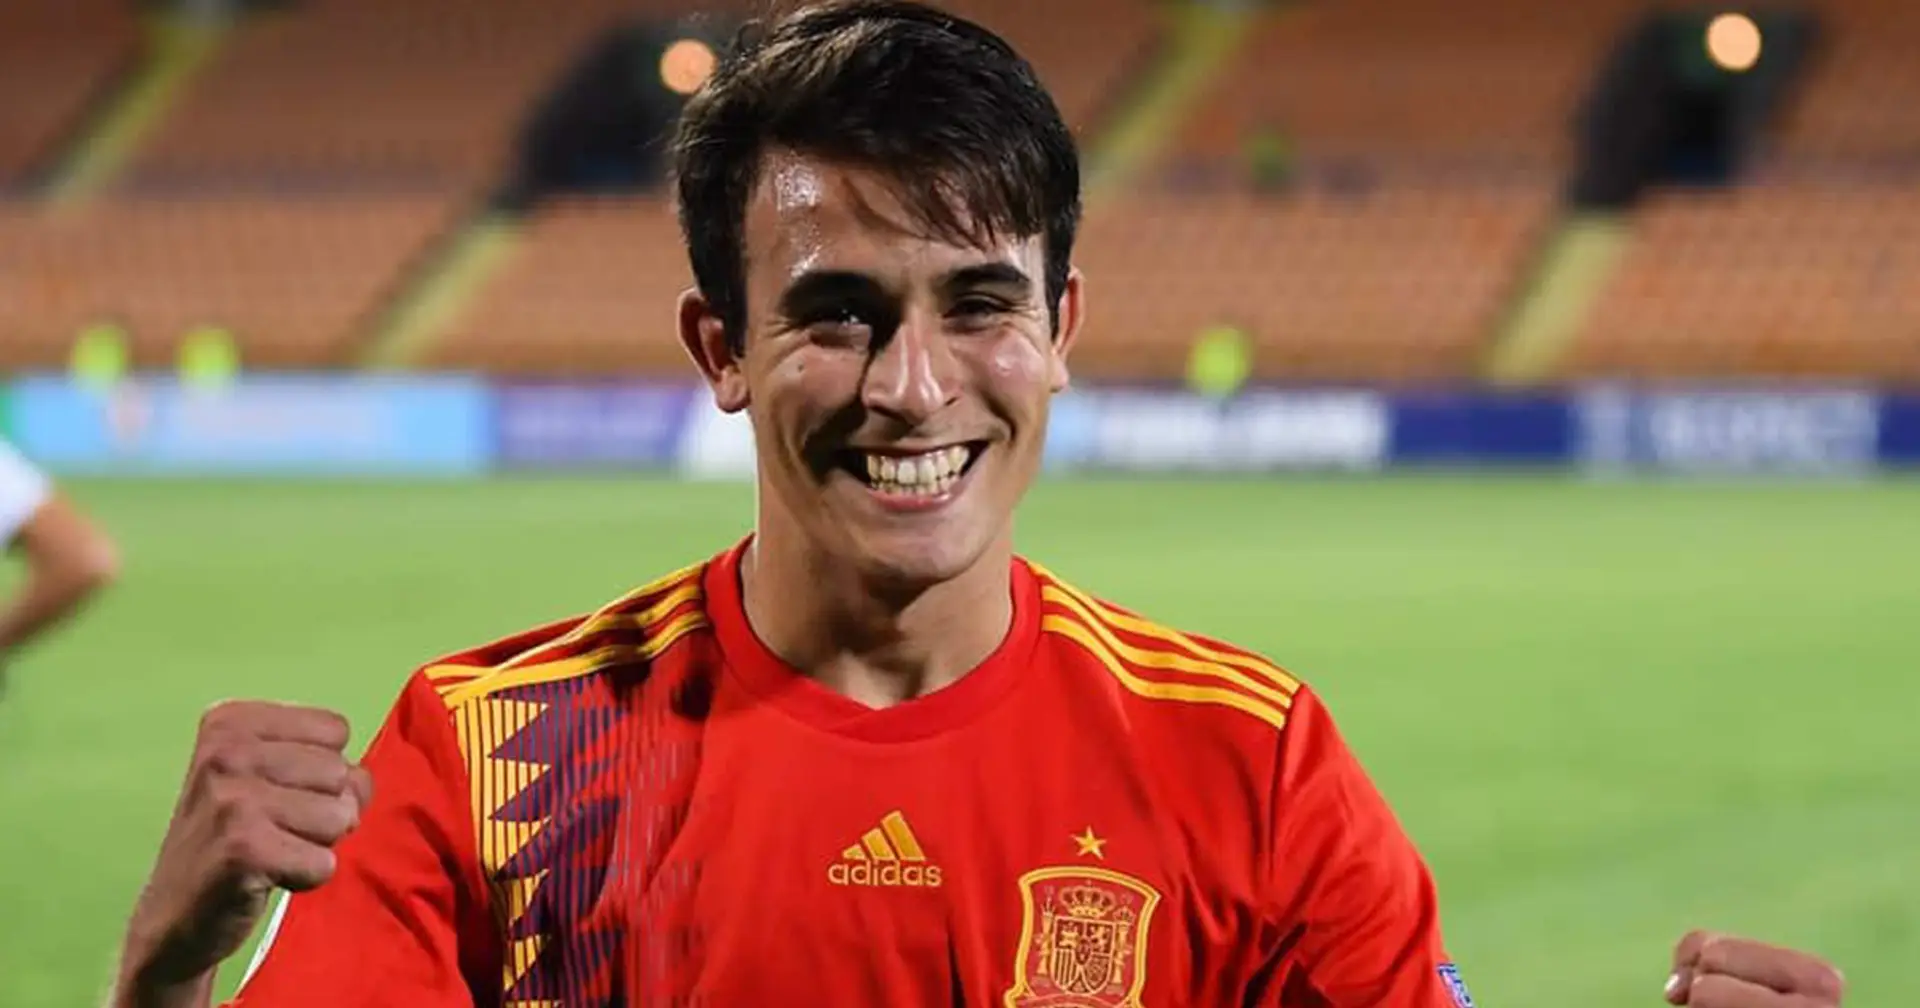 Born for Barca: Eric Garcia's brilliant outing vs Greece in 6 key stats